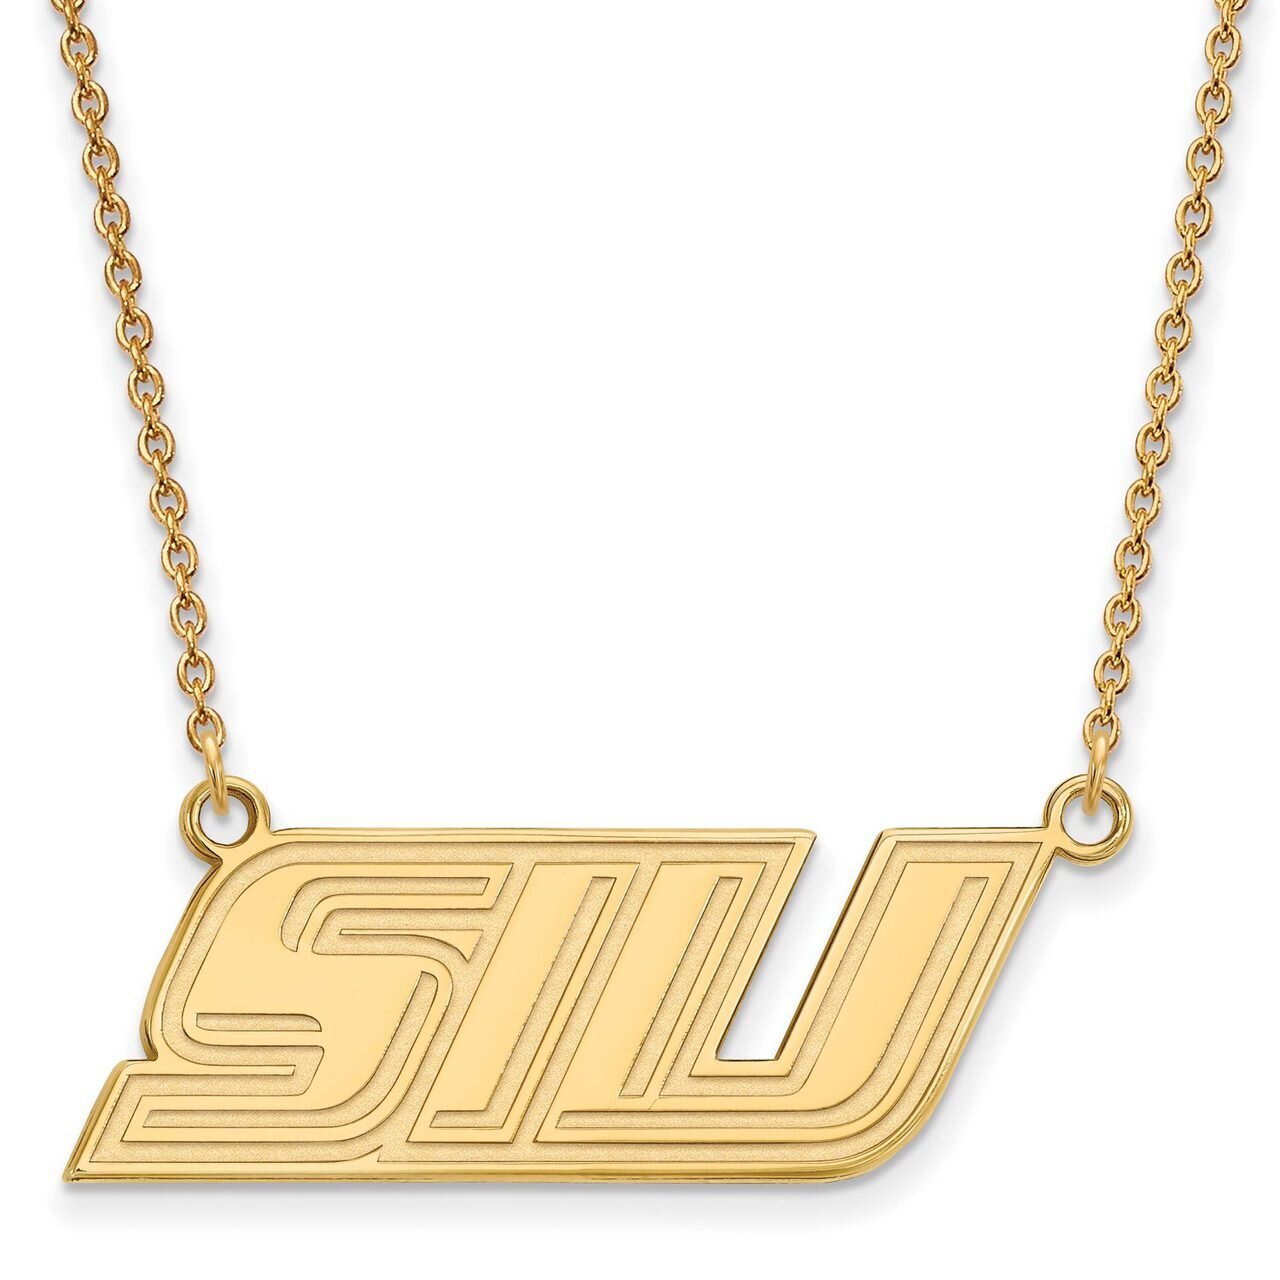 Southern Illinois University Small Pendant with Chain Necklace 14k Yellow Gold 4Y009SIU-18